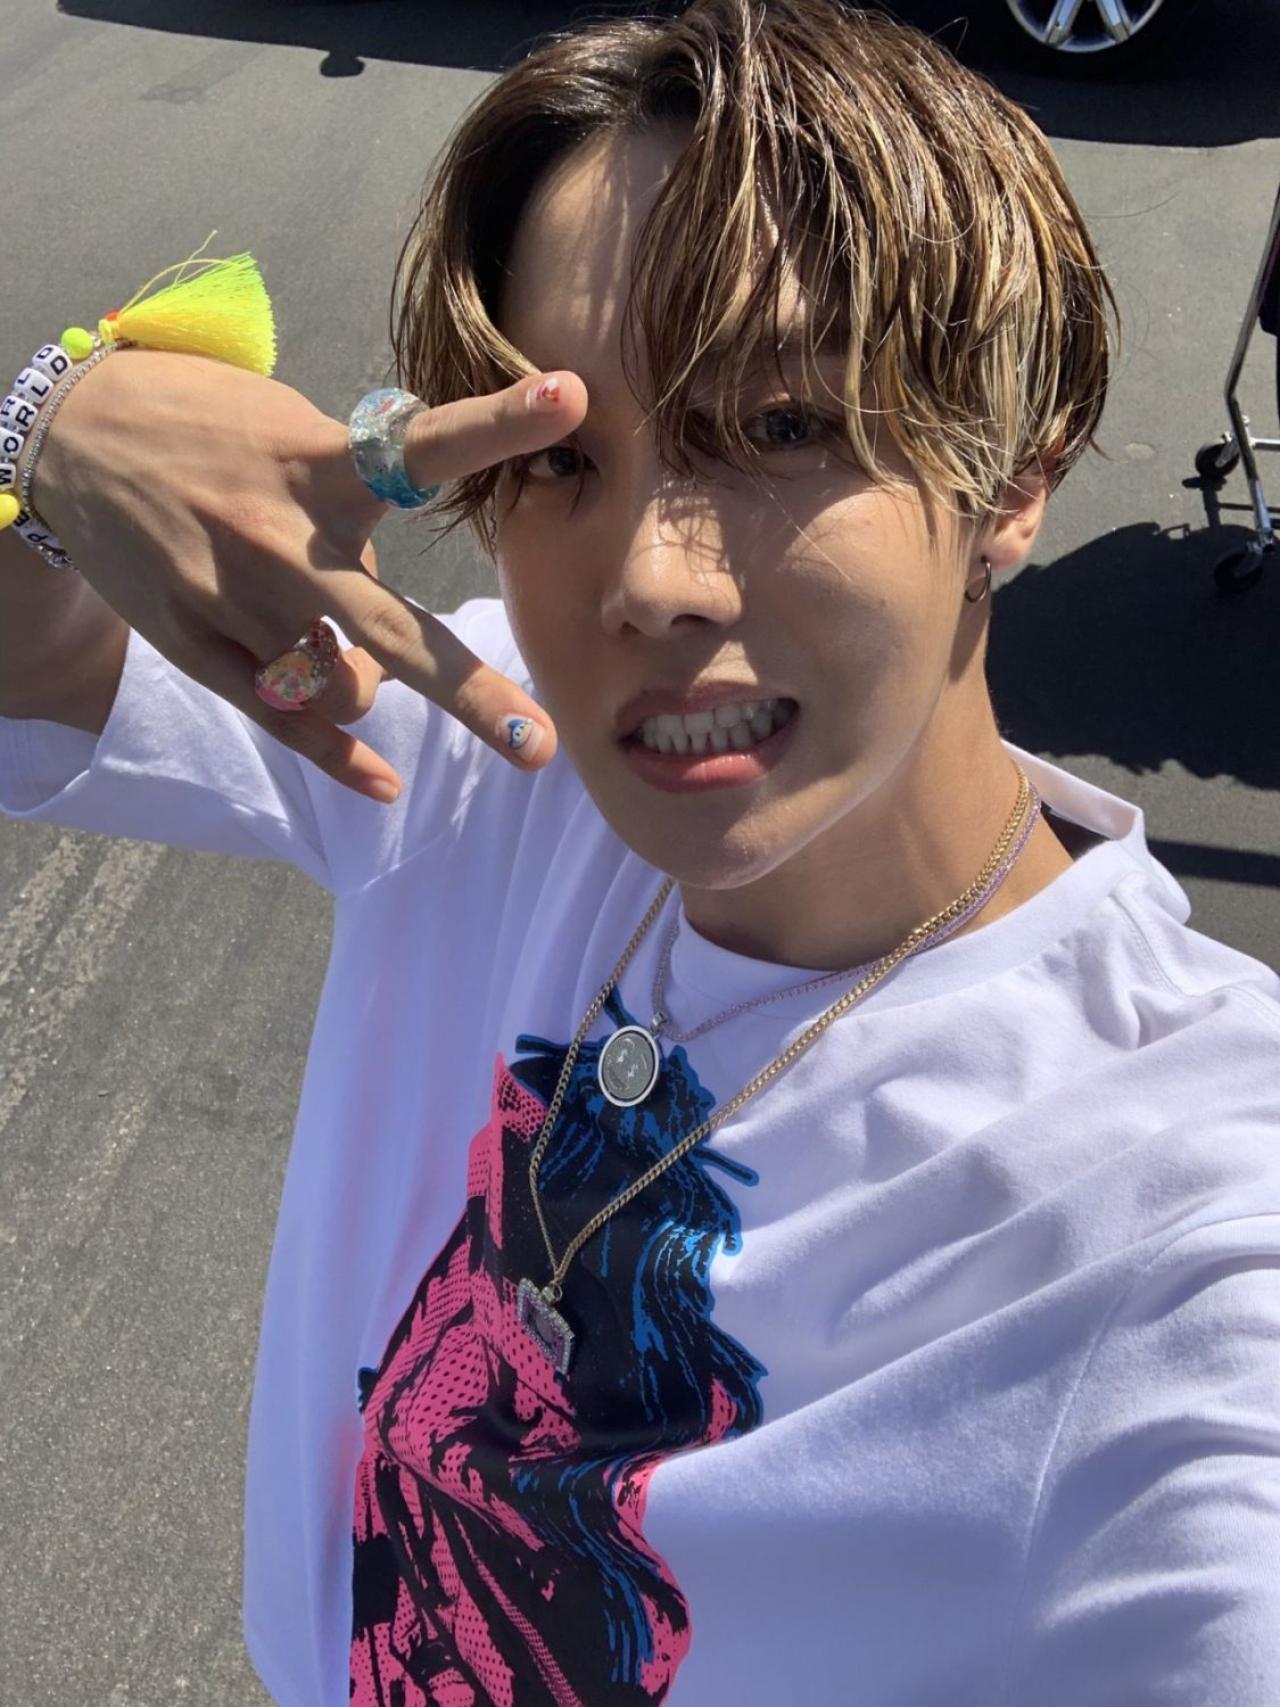 J-Hope returned to his street dancing and hip-hop roots when he filmed for his single, 'Chicken Noodle Soup' with Becky G. in Los Angeles. His oversized t-shirts, signature street-dance bucket hat and baggy pants as well as highlights stole ARMYs' hearts